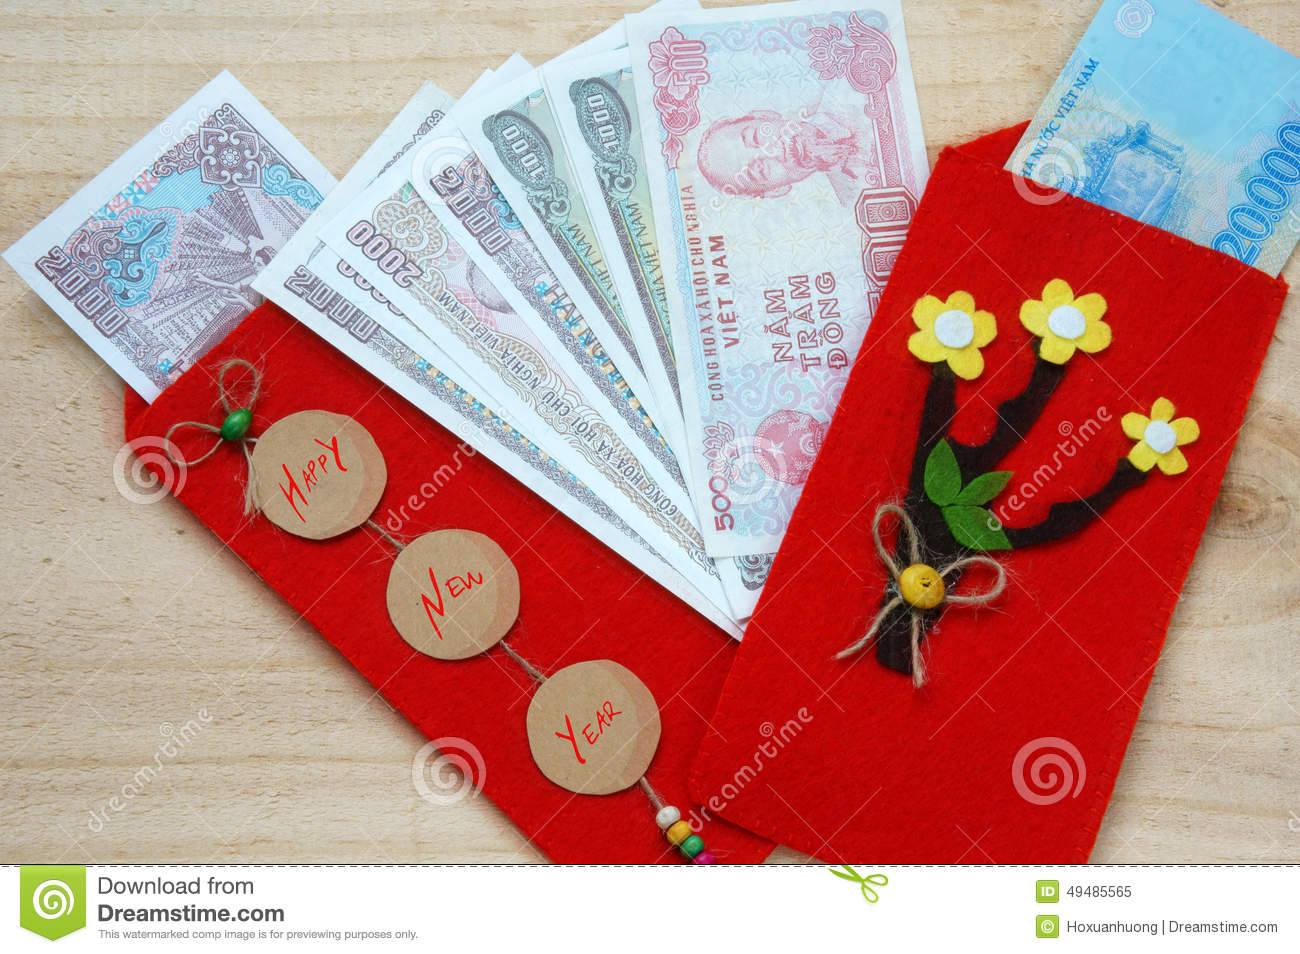 Of Vietnamese On Tet Is Lucky Money A Vietnam Traditional Culture